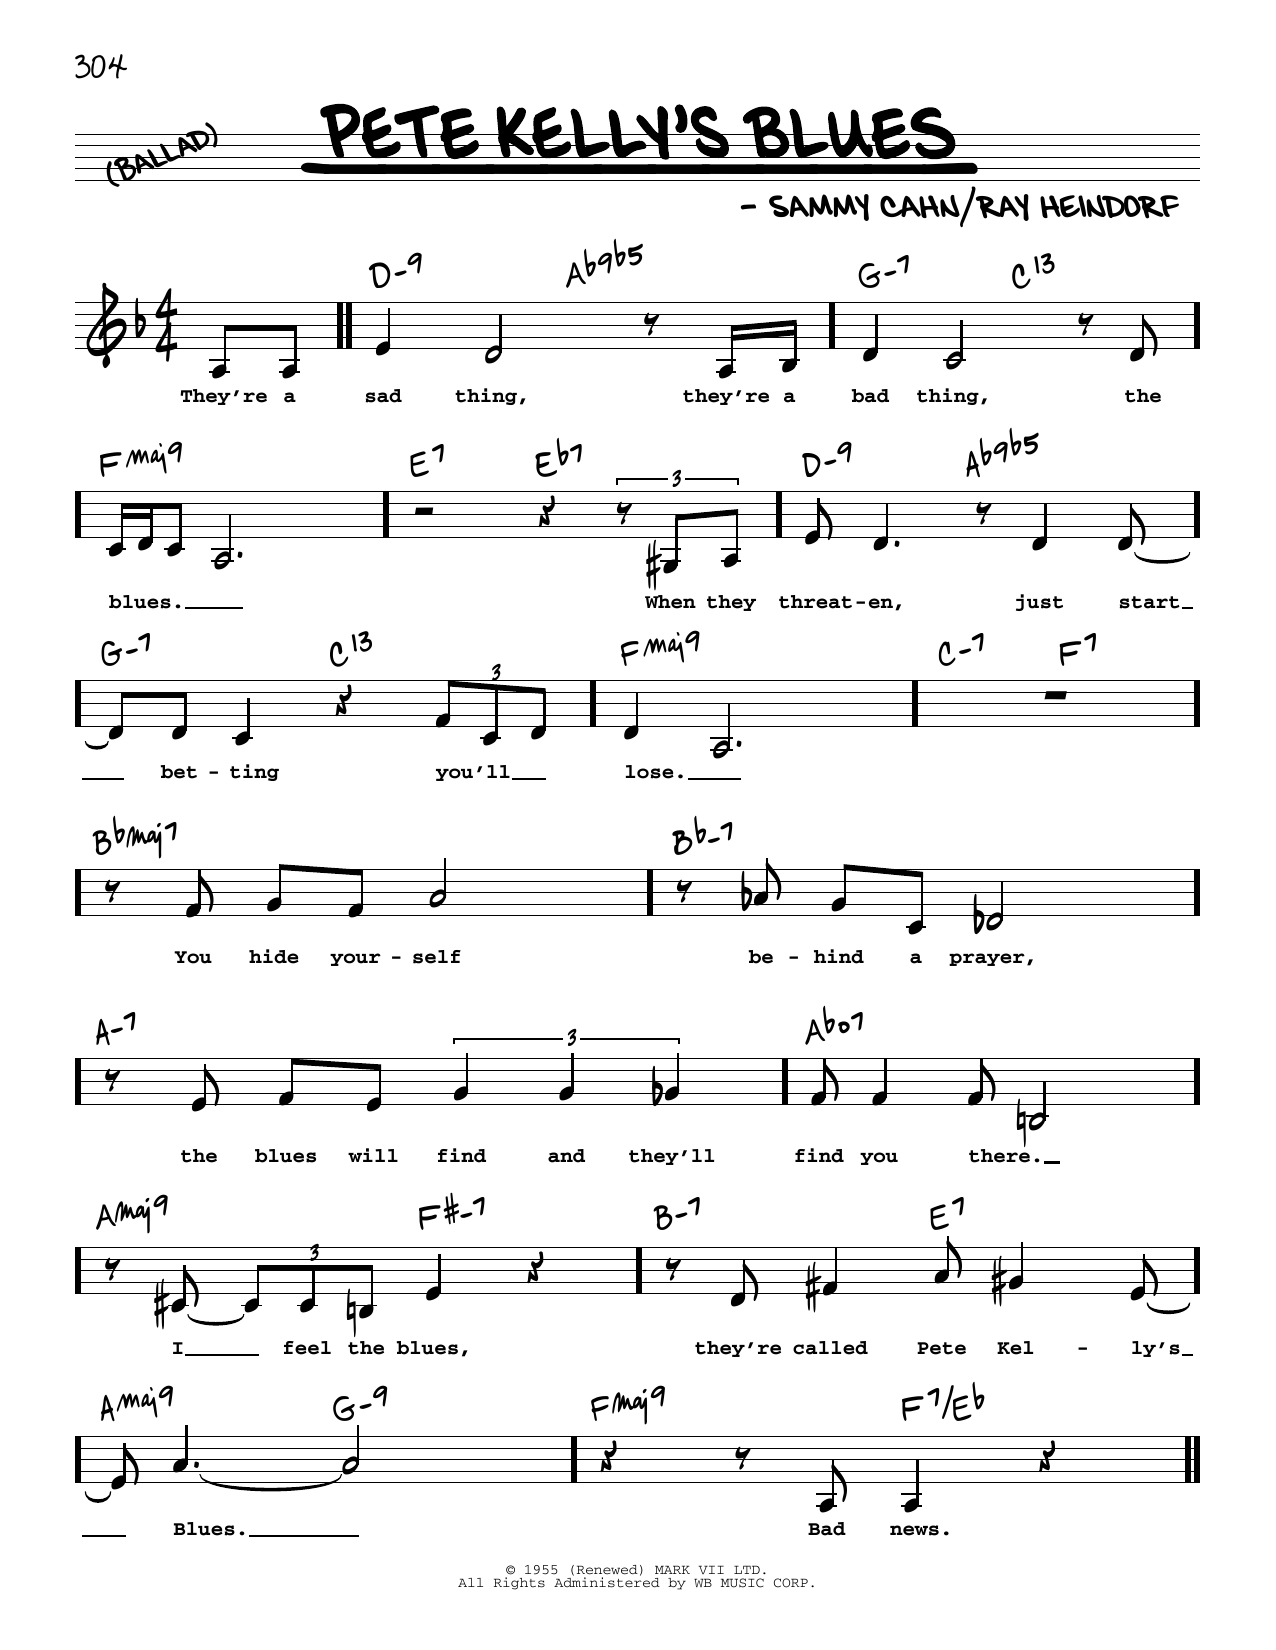 Download Sammy Cahn Pete Kelly's Blues (Low Voice) Sheet Music